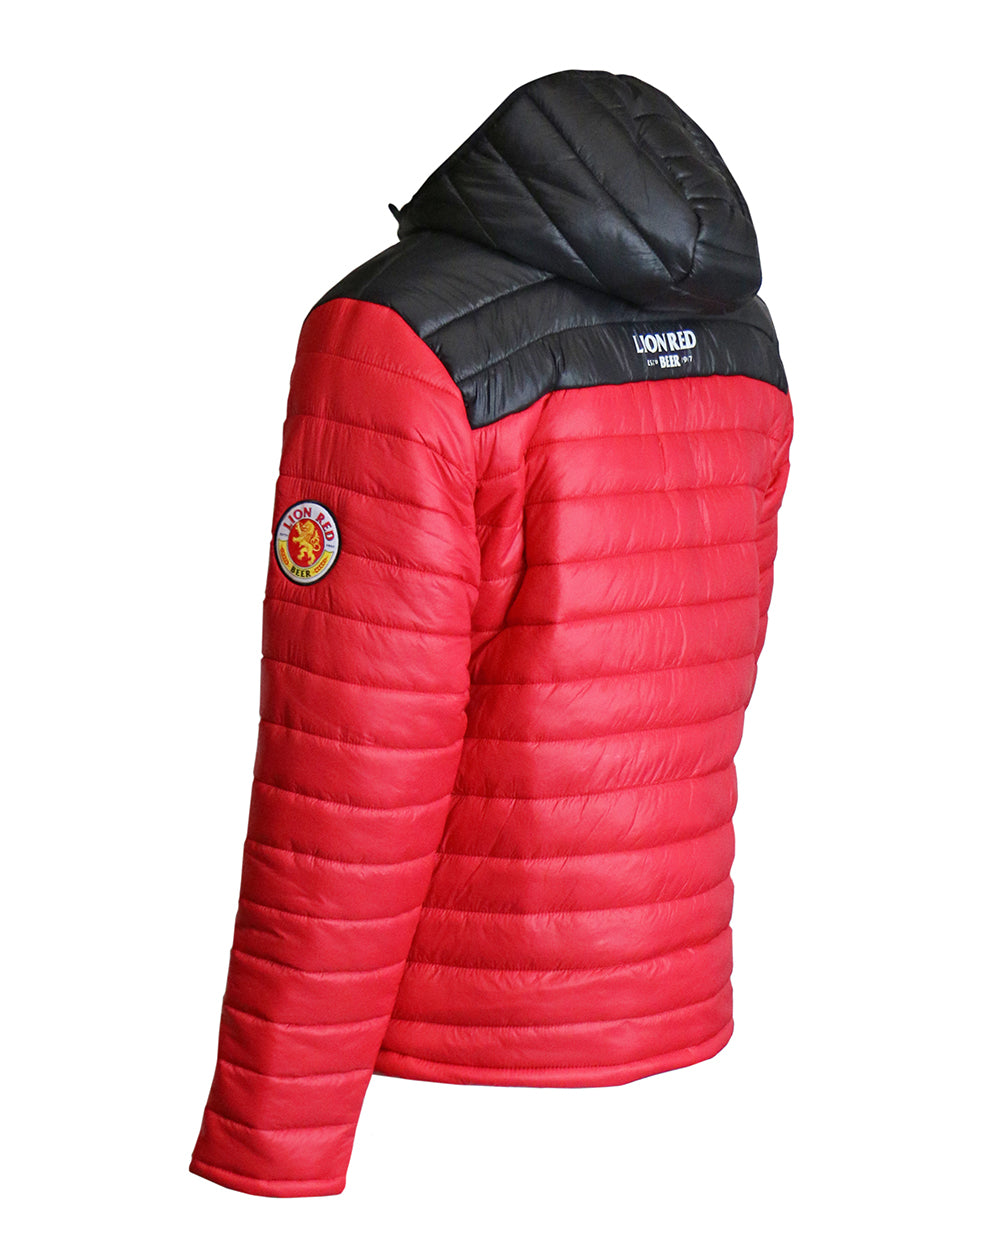 Lion Red Hooded Puffer Jacket -  Beer Gear Apparel & Merchandise - Speights - Lion Red - VB - Tokyo Dy merch